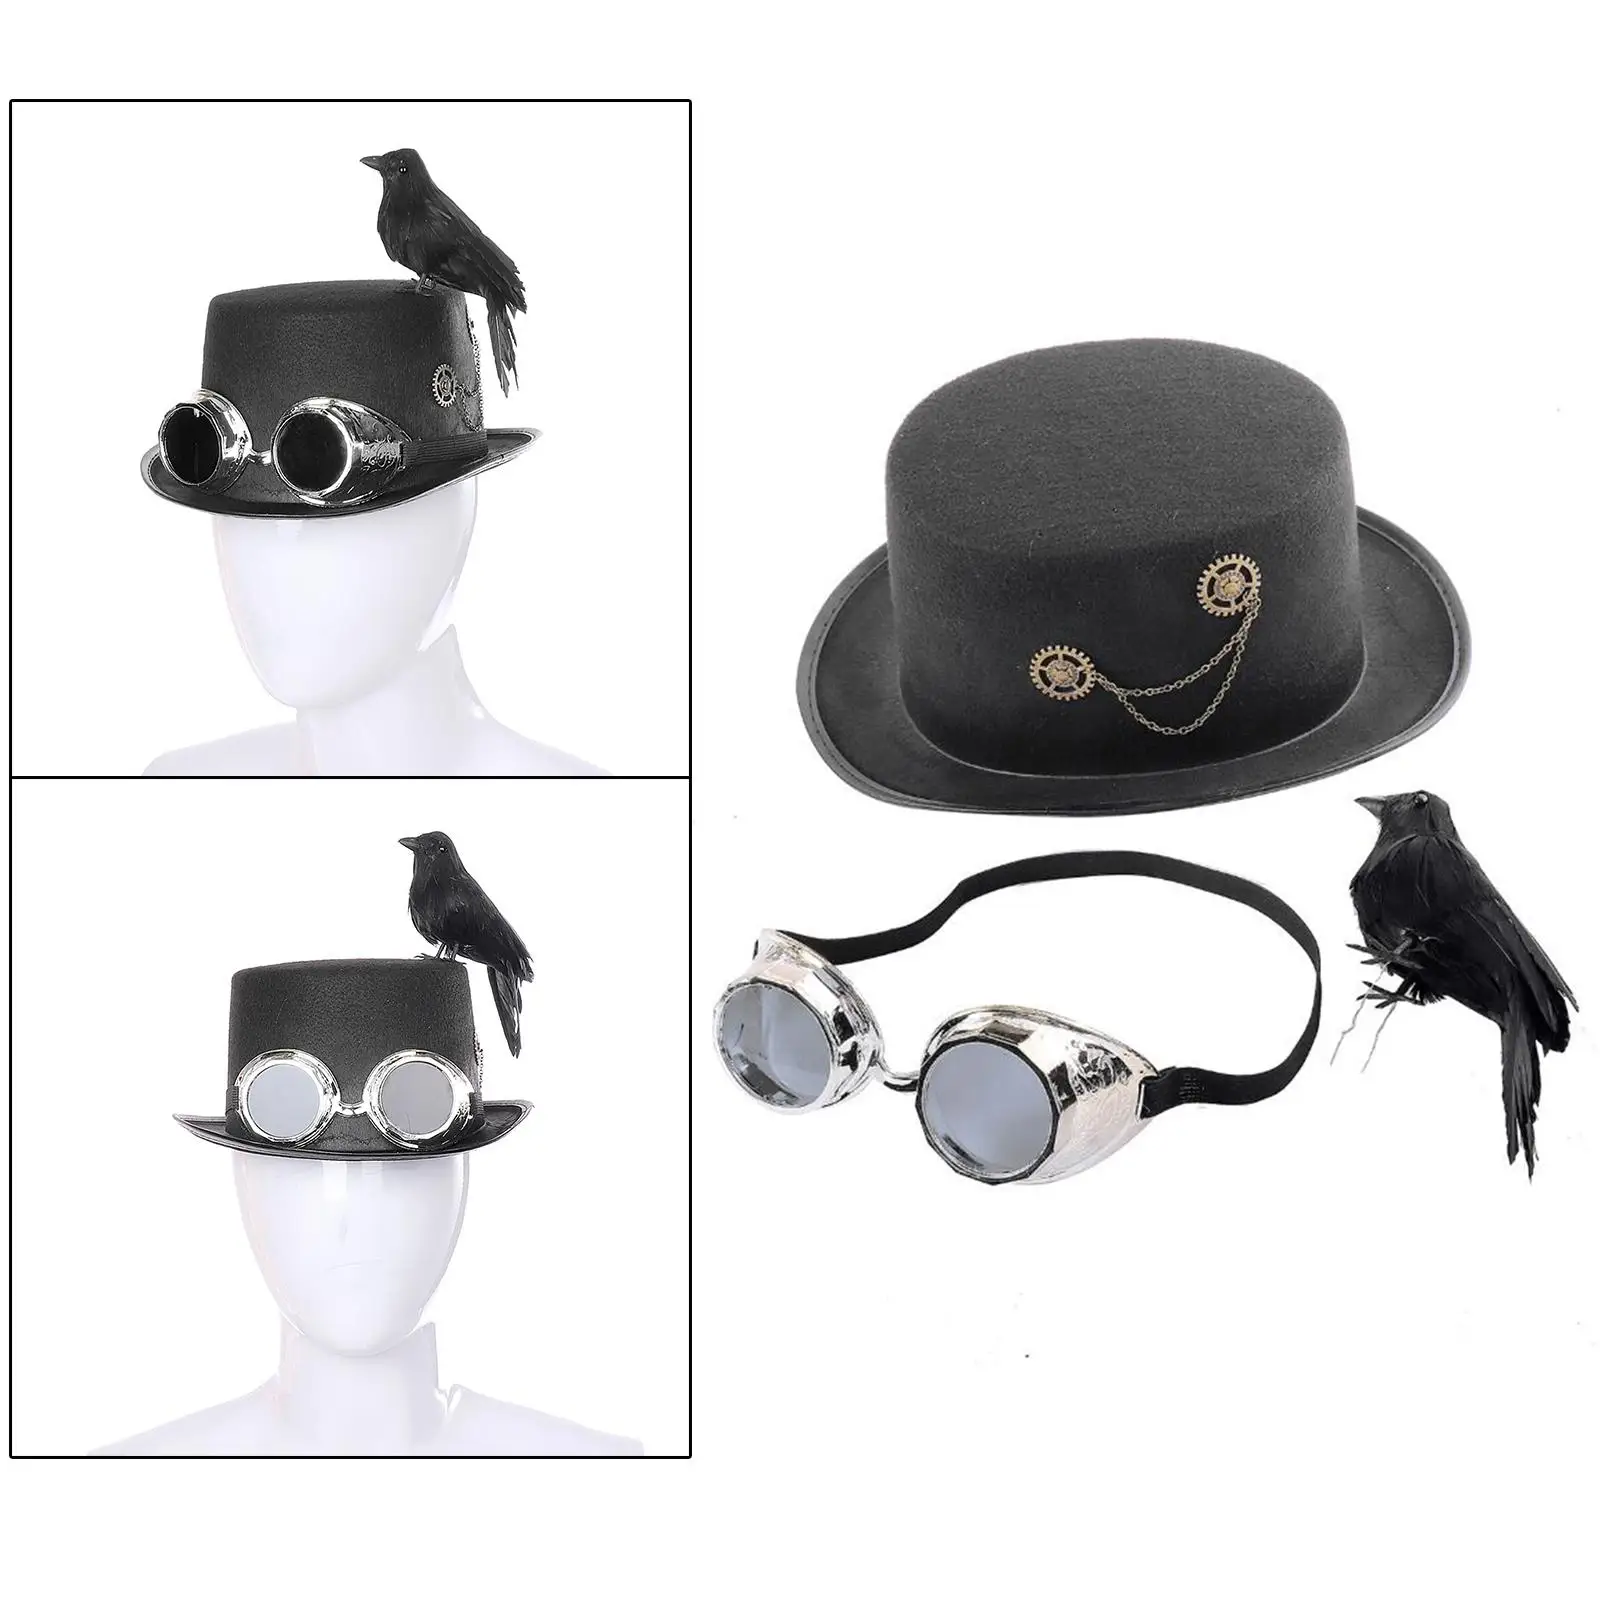 Deluxe Black Steampunk Top Hat with Goggles Formal Vintage Hat for Dress up